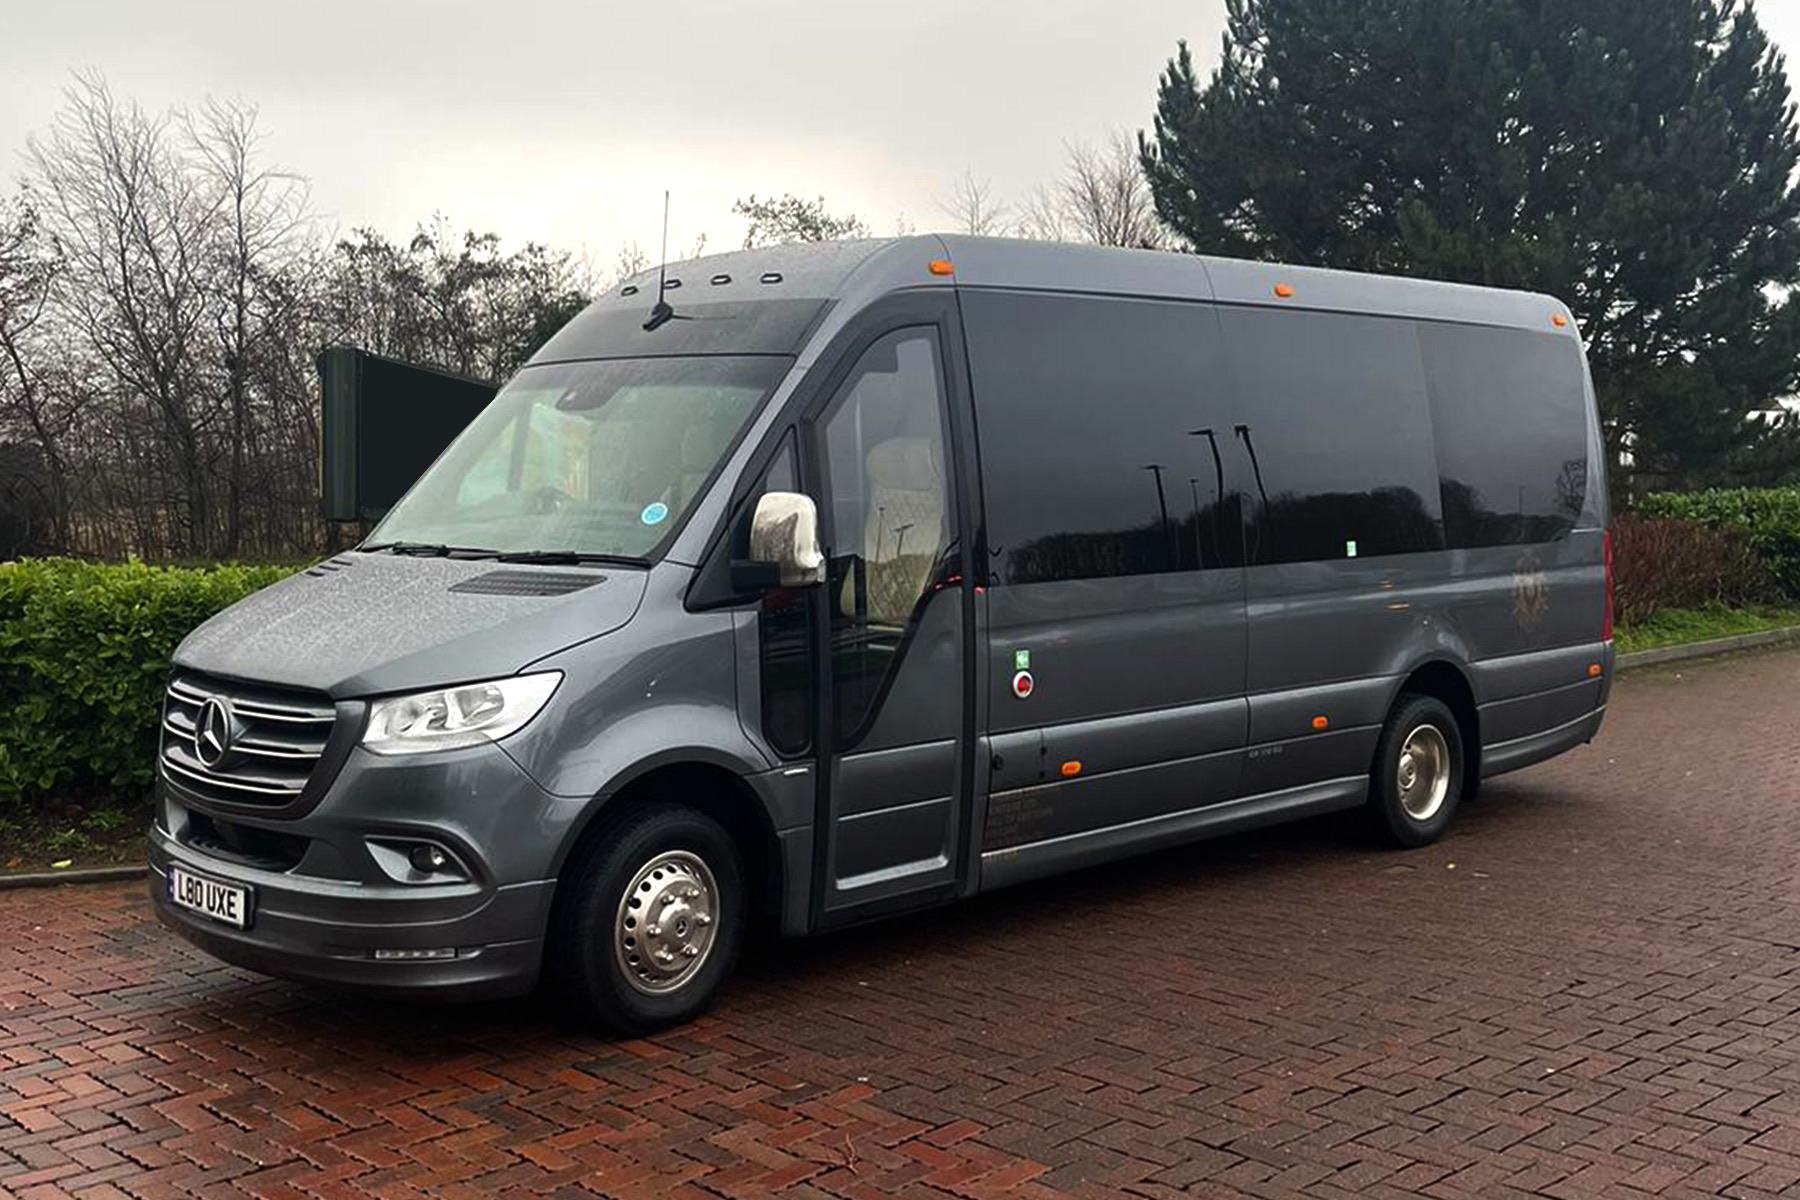 How to Select the Best 16 Seater Minibus Hire for Your UK Road Trip